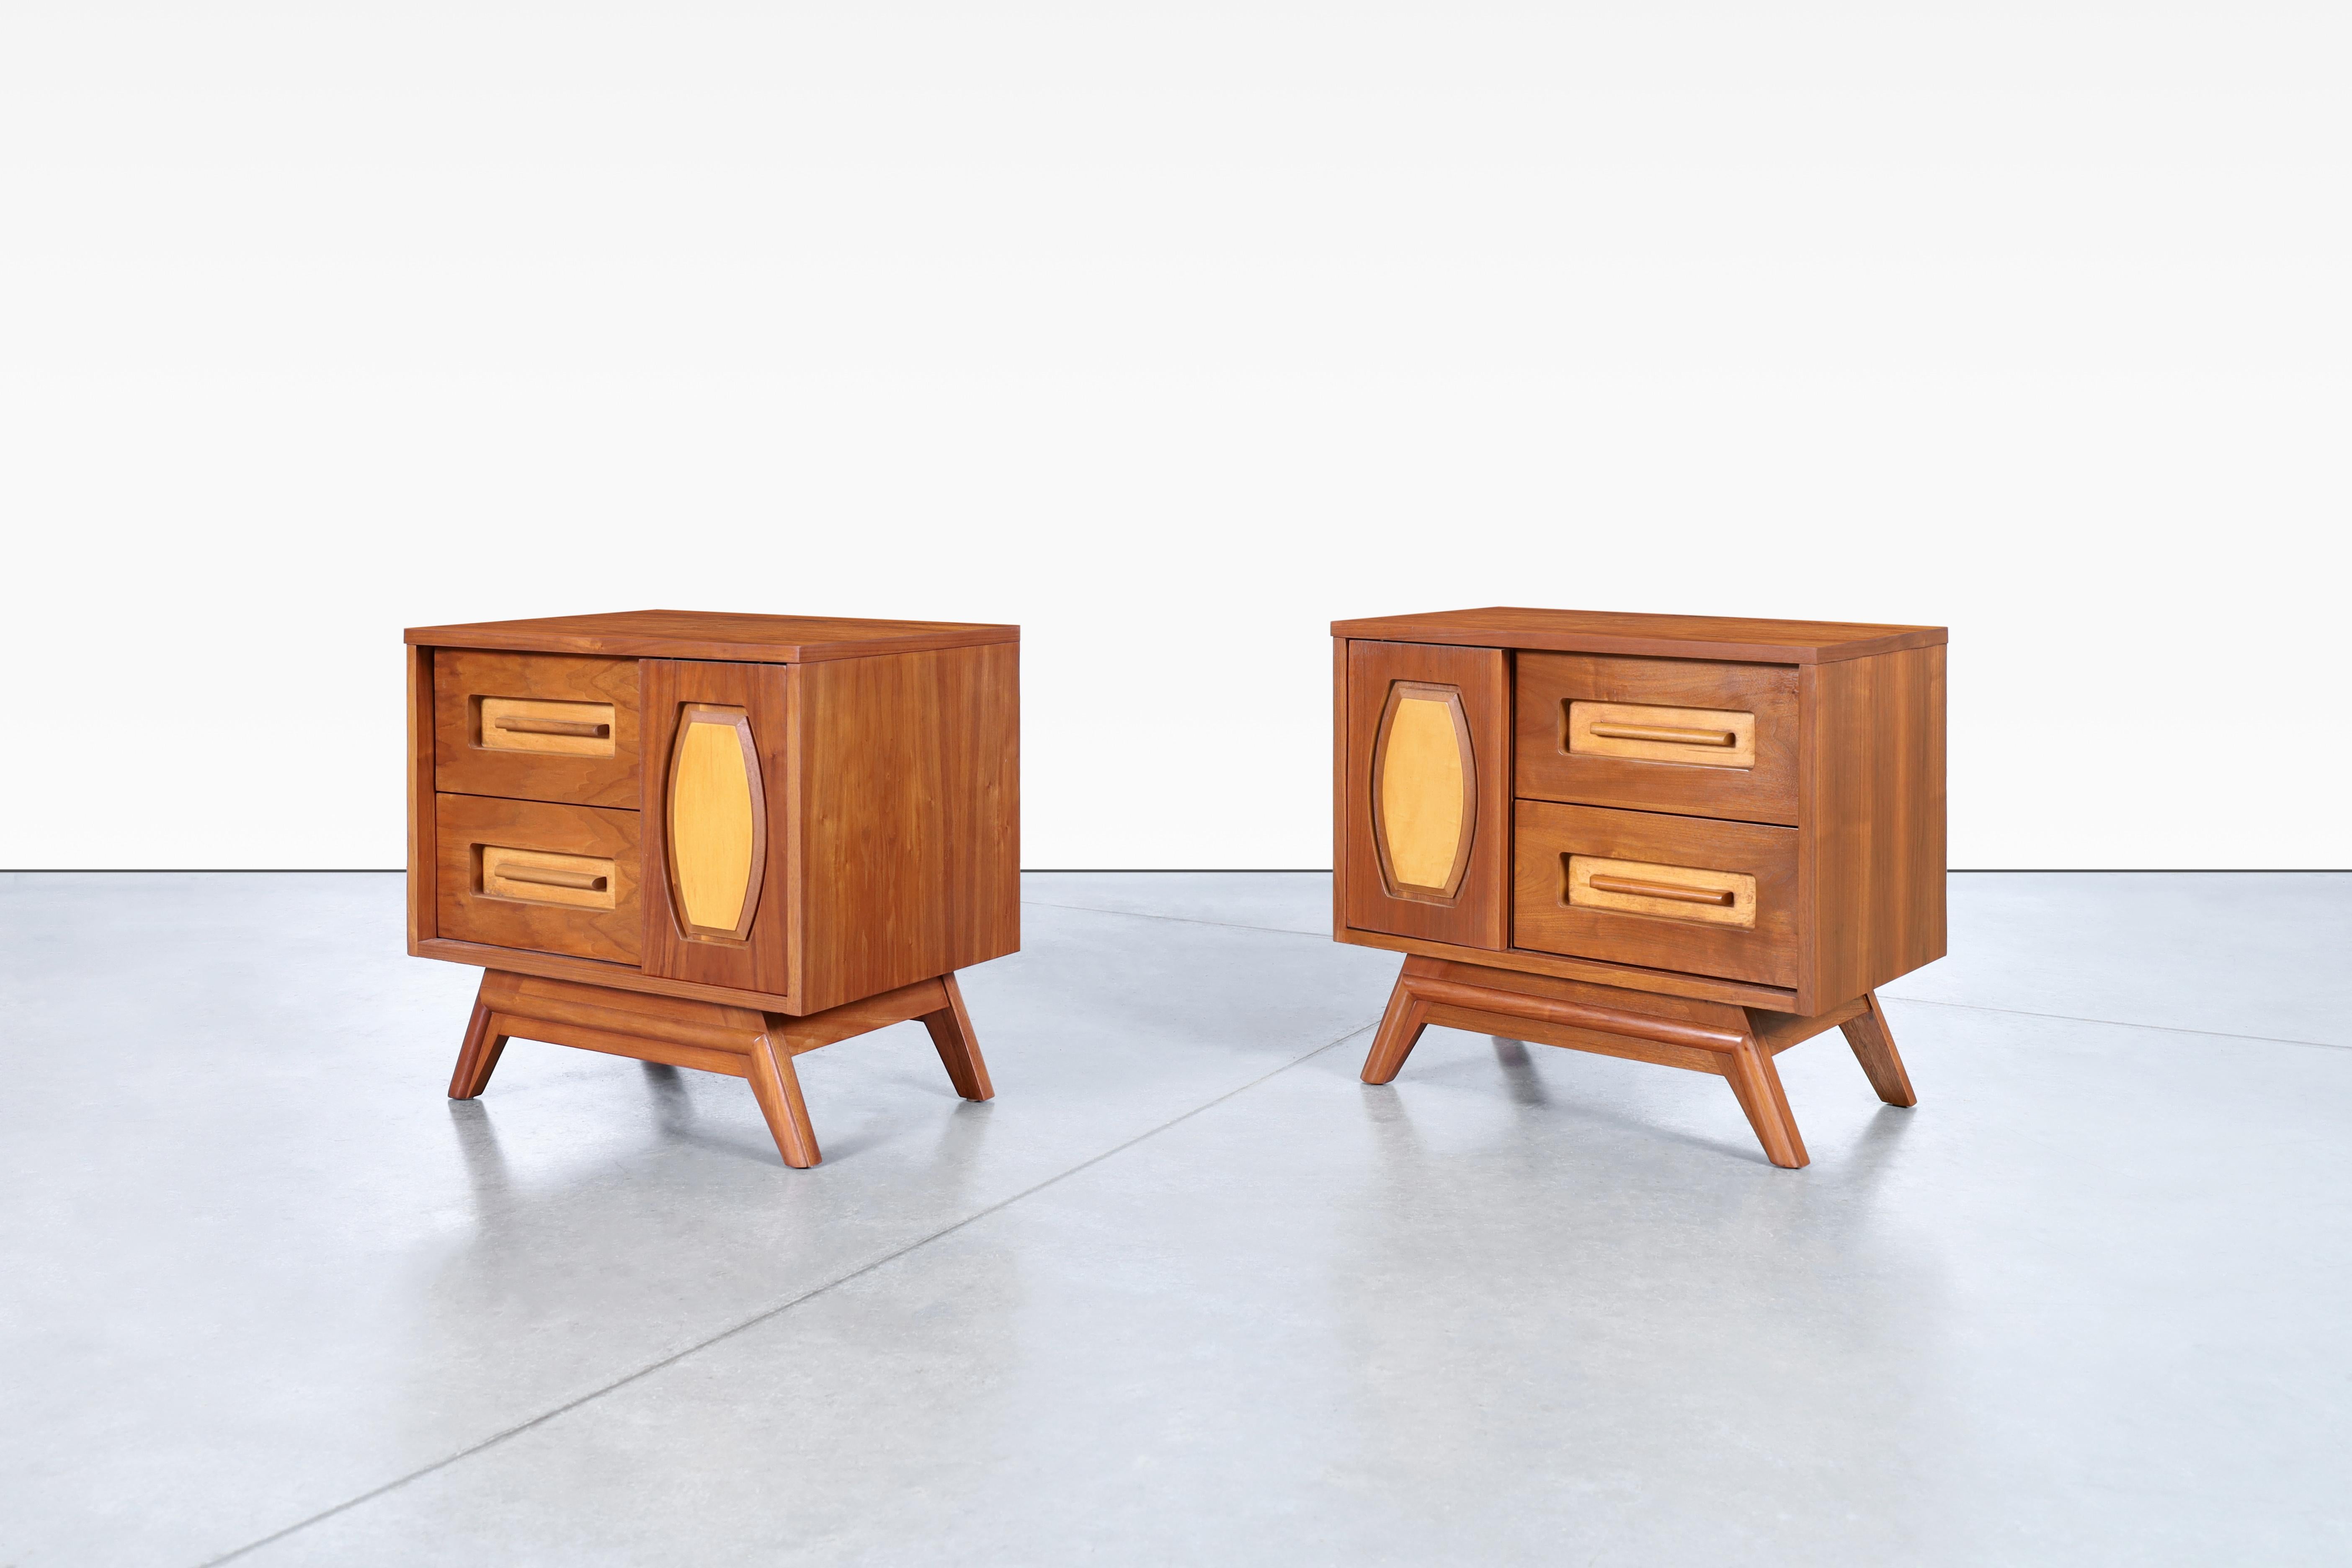 Amazing mid-Century modern walnut nightstands manufactured by Young Mfg. in the United States, circa 1960s. These nightstands are truly exquisite pieces crafted from the finest quality walnut and birch wood, producing stunning natural grain patterns